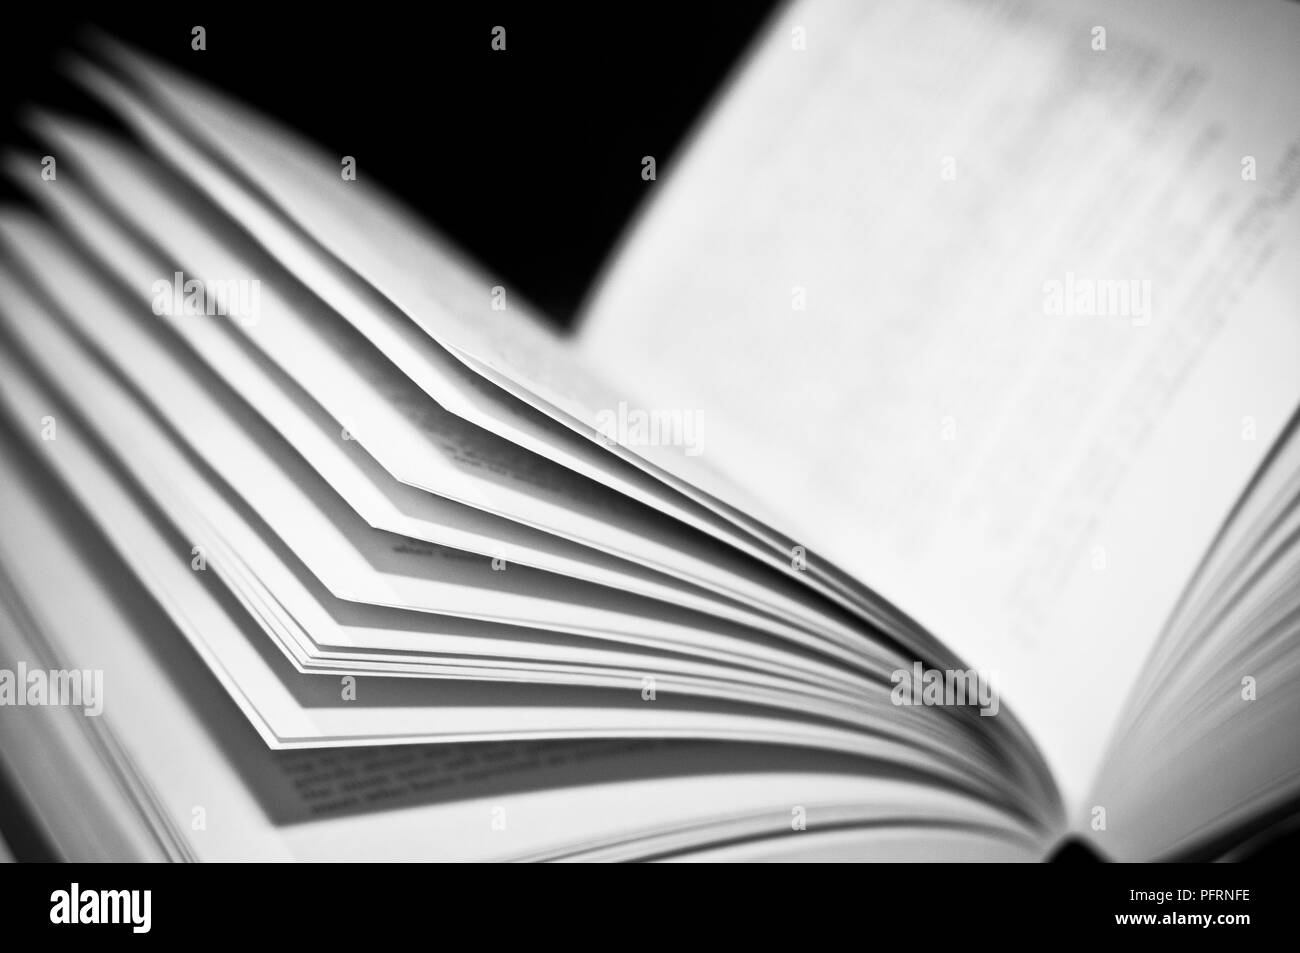 Offenes Buch, close-up Stockfoto